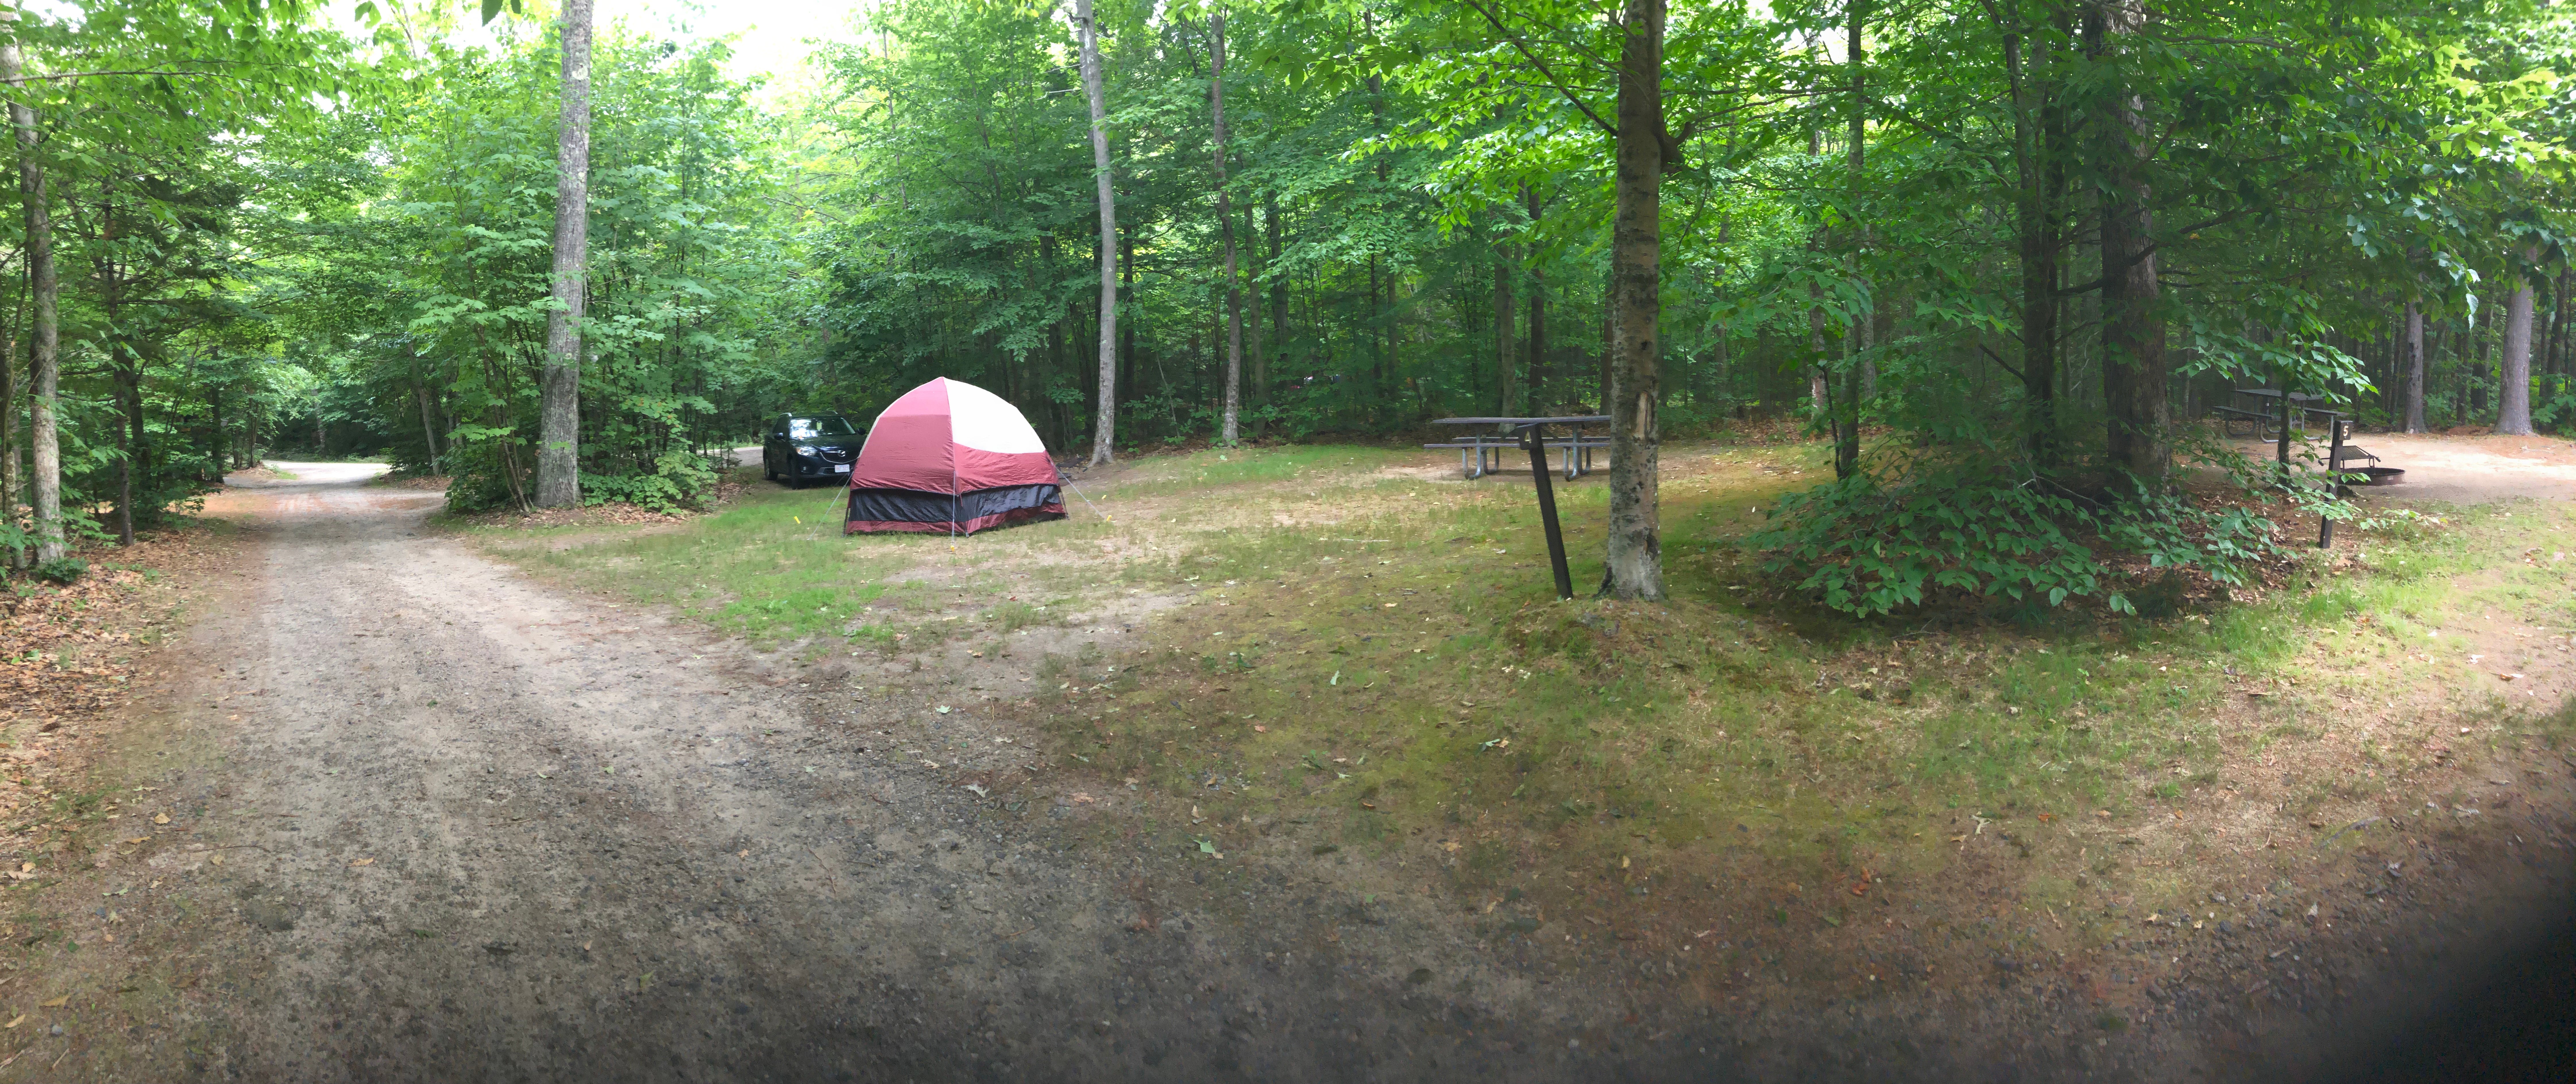 Camper submitted image from Pillsbury State Park Campground - 5